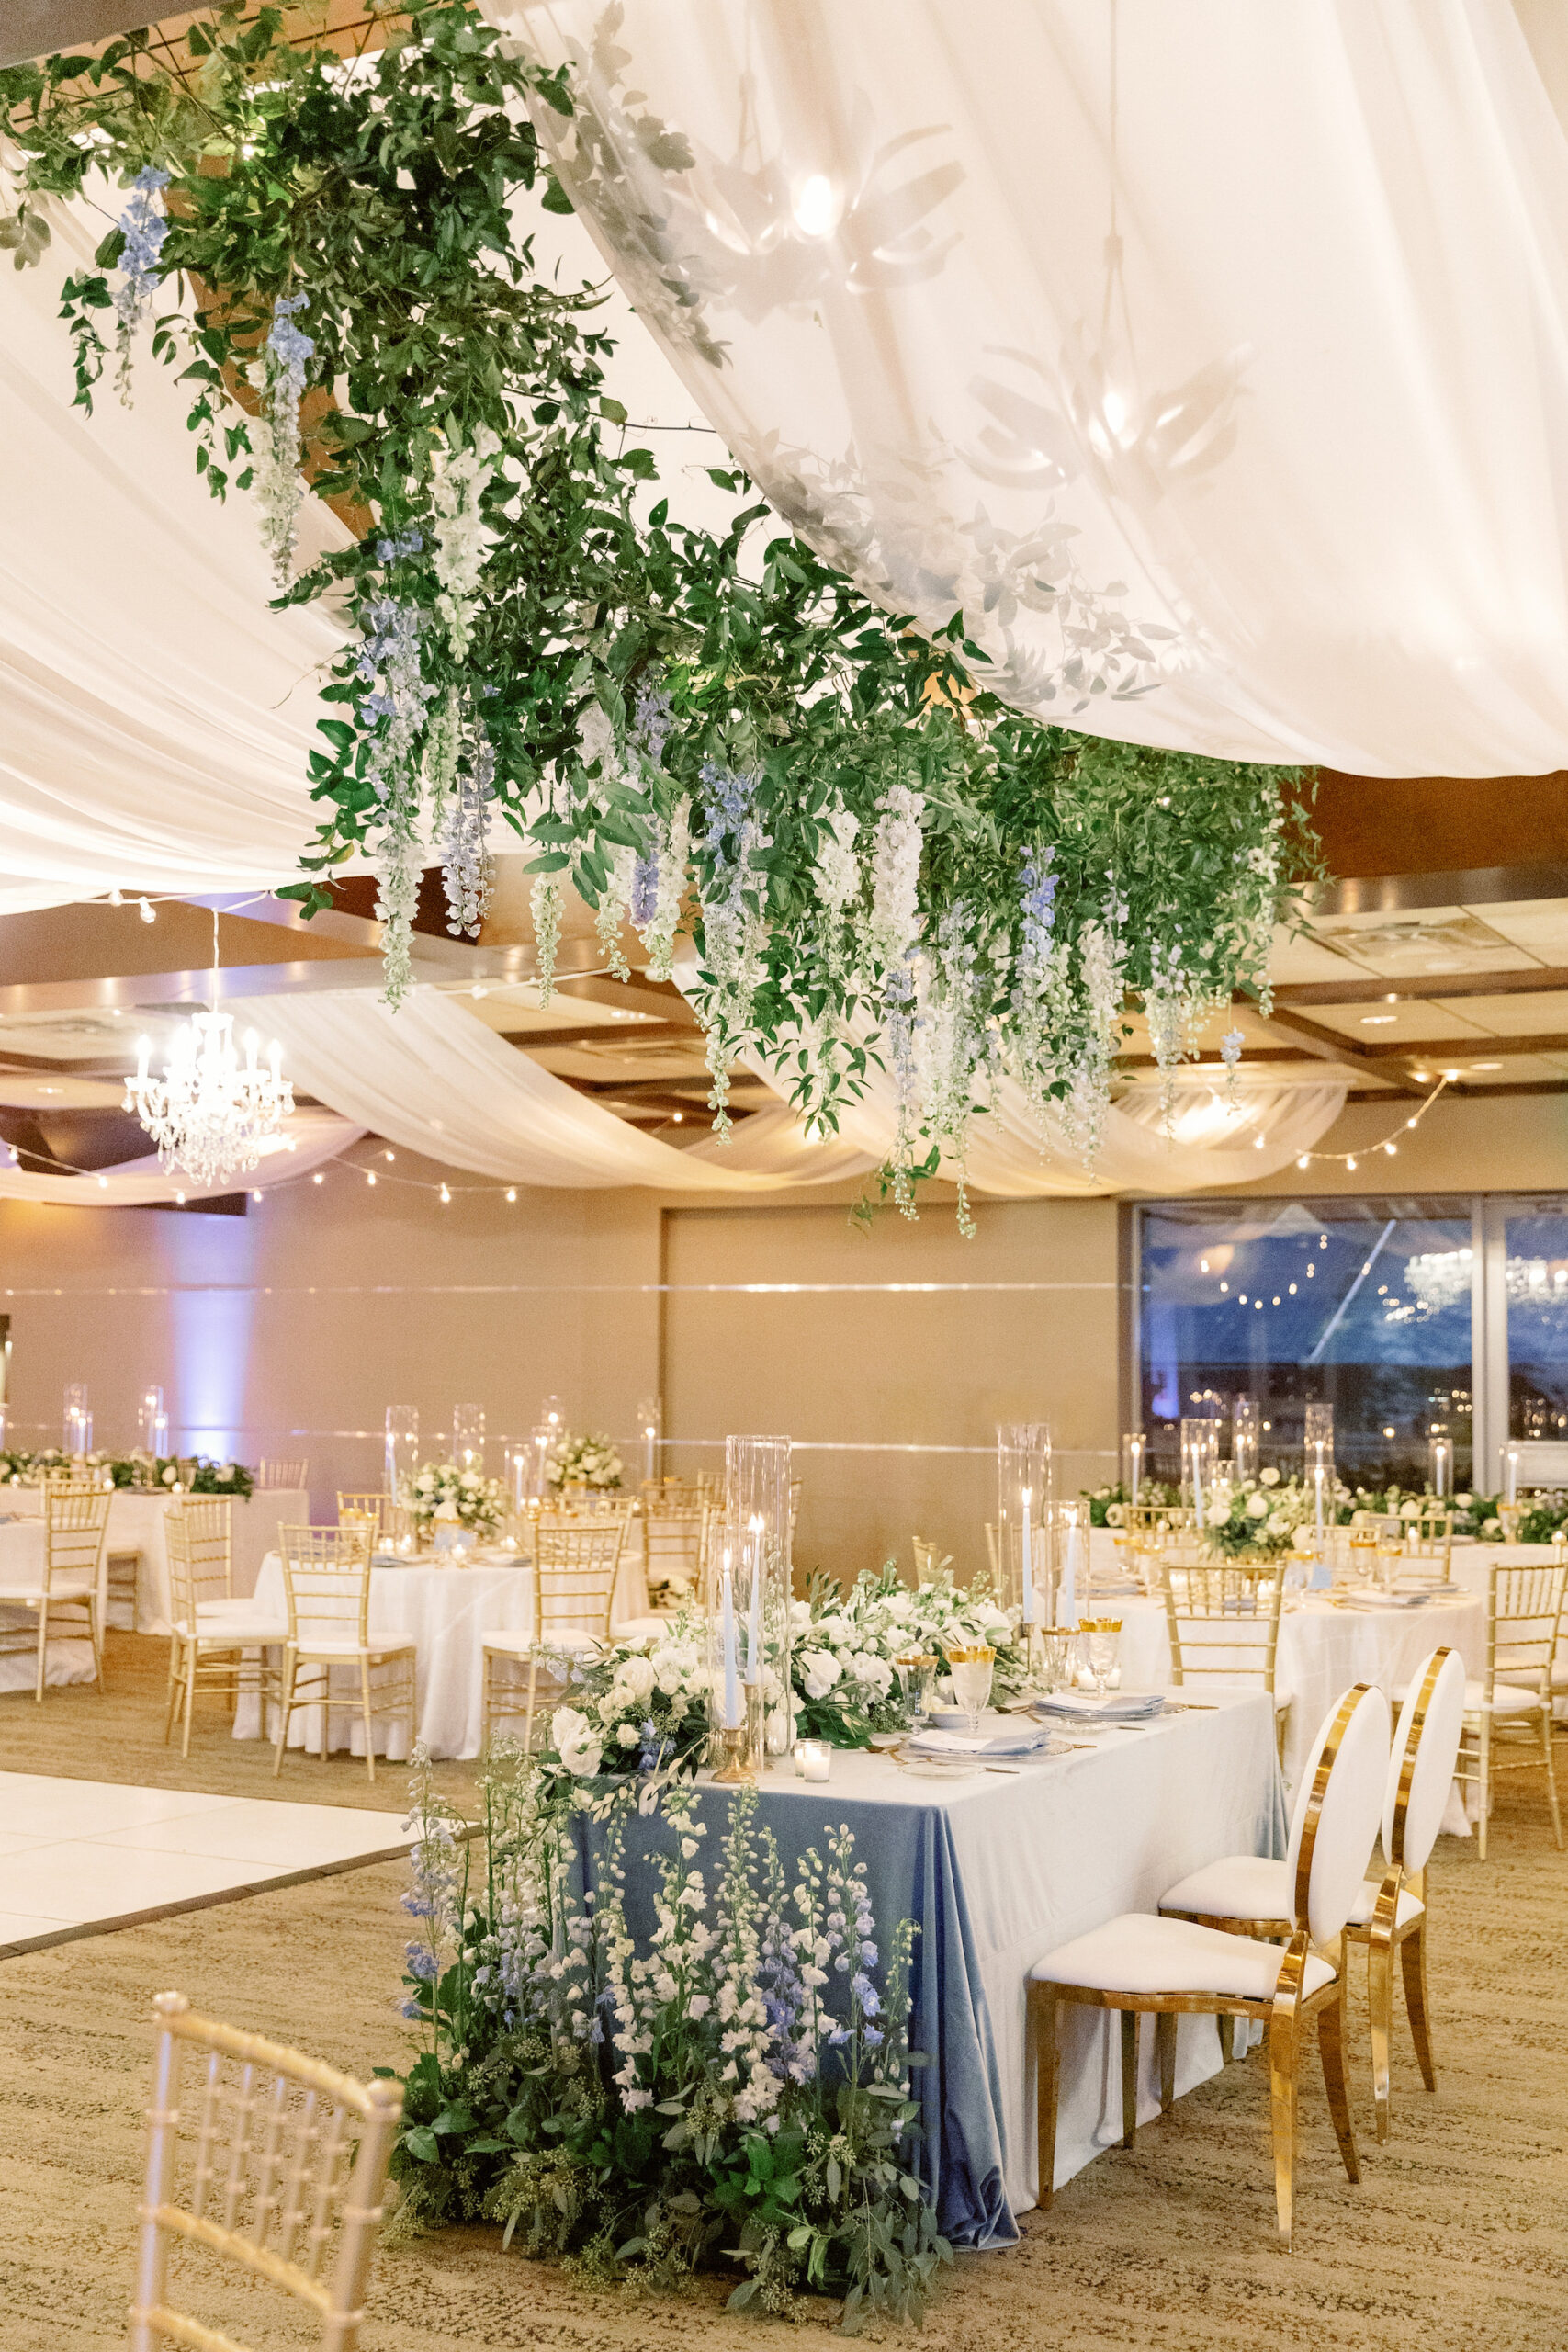 Reception Decor Ideas | Romantic Indoor White and Gold Spring Wedding Reception with Gold Chiavari Chairs and White Ceiling Drapery with Hanging Floral Arrangements and Garden Inspired Sweetheart Table | Sarasota Wedding Planner MDP Events | Florist Botanica International Design Studio | Venue Marie Selby Gardens